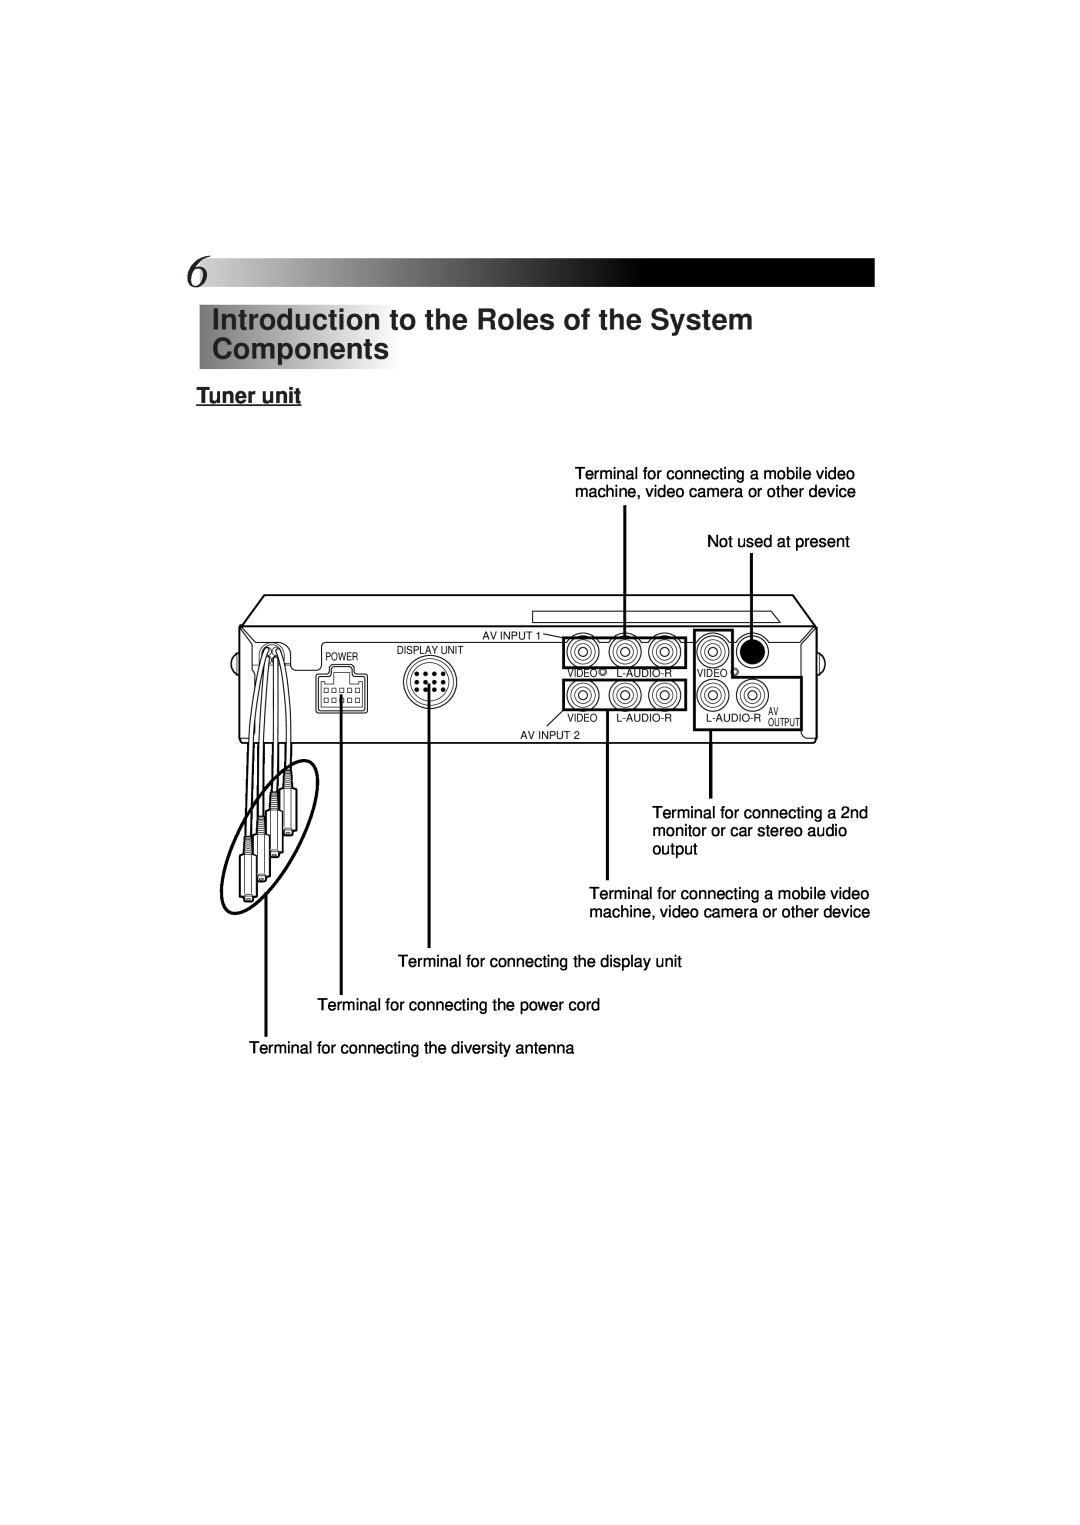 JVC KV-C1 manual Introduction to the Roles of the System Components, Tuner unit 